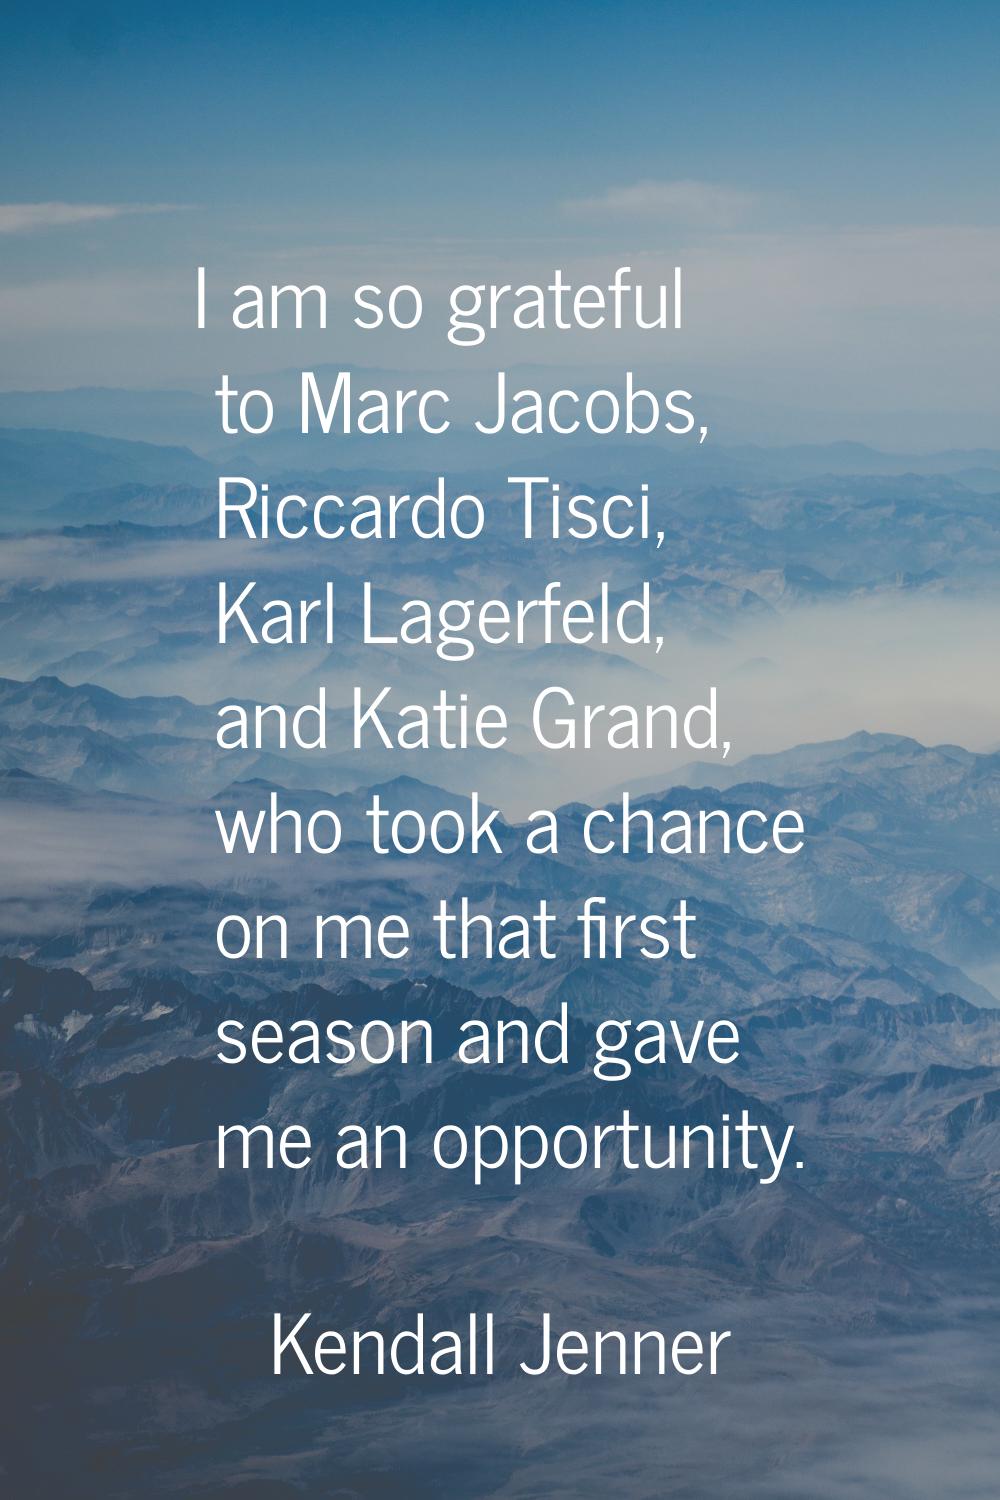 I am so grateful to Marc Jacobs, Riccardo Tisci, Karl Lagerfeld, and Katie Grand, who took a chance